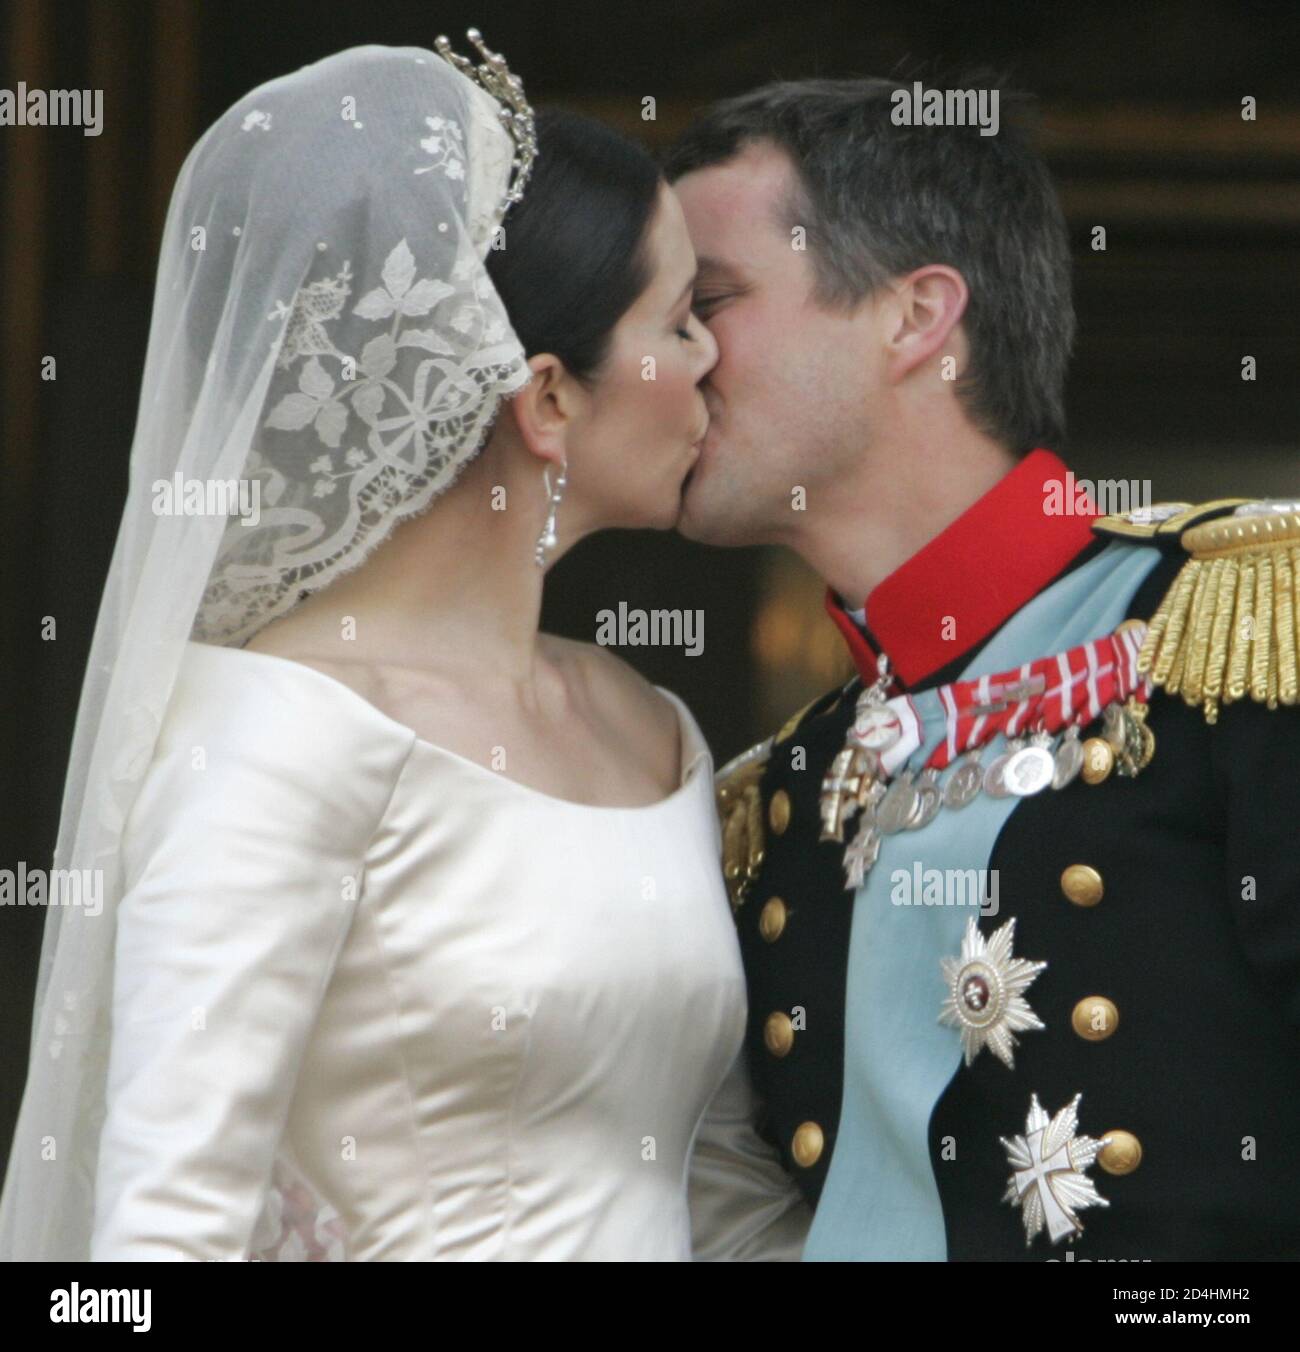 DANISH CROWN PRINCE FREDERIK AND HIS NEWLY WED WIFE CROWN PRINCESS MARY KISS  ON THE BALCONY OF AMALIENBORG PALACE IN COPENHAGEN. Danish Crown Prince  Frederik and his newly wed wife Crown Princess